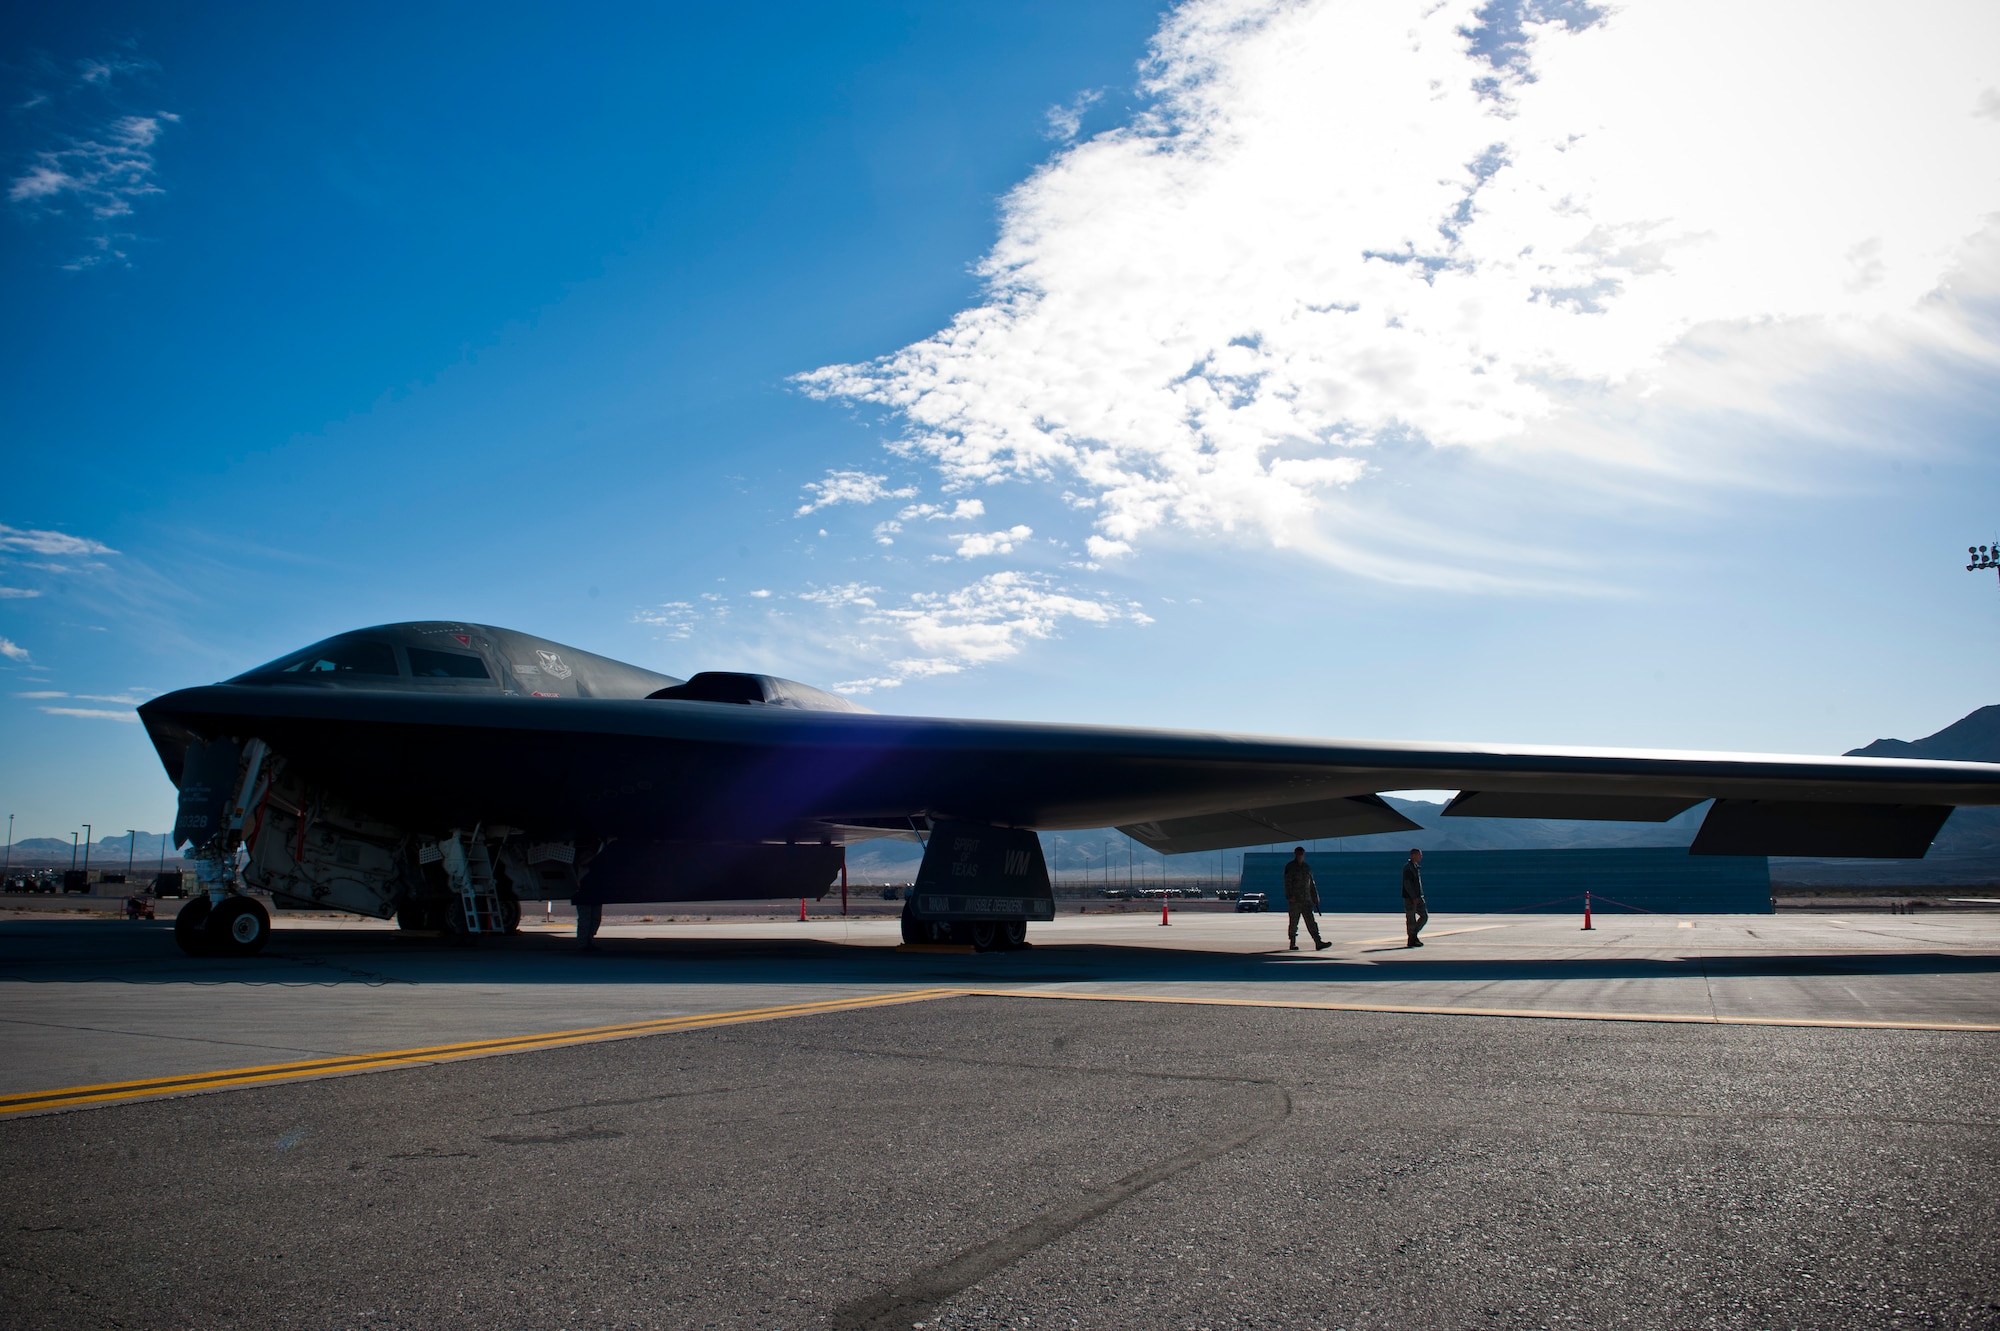 A U.S. Air Force B-2 Spirit assigned to the 13th Bomb Squadron from Whiteman Air Force Base, Mo., gets inspected by ground crews during Red Flag 14-1 Feb. 10, 2014, at Nellis AFB, Nev. The B-2 is the only aircraft in the world of its kind, bringing unmatched long-range, precision-strike capability options to combatant commanders around the world. Red Flag gives air and ground crews the opportunity to experience realistic combat scenarios they may find in a future real-world environment. (U.S. Air Force photo by Airman 1st Class Thomas Spangler)